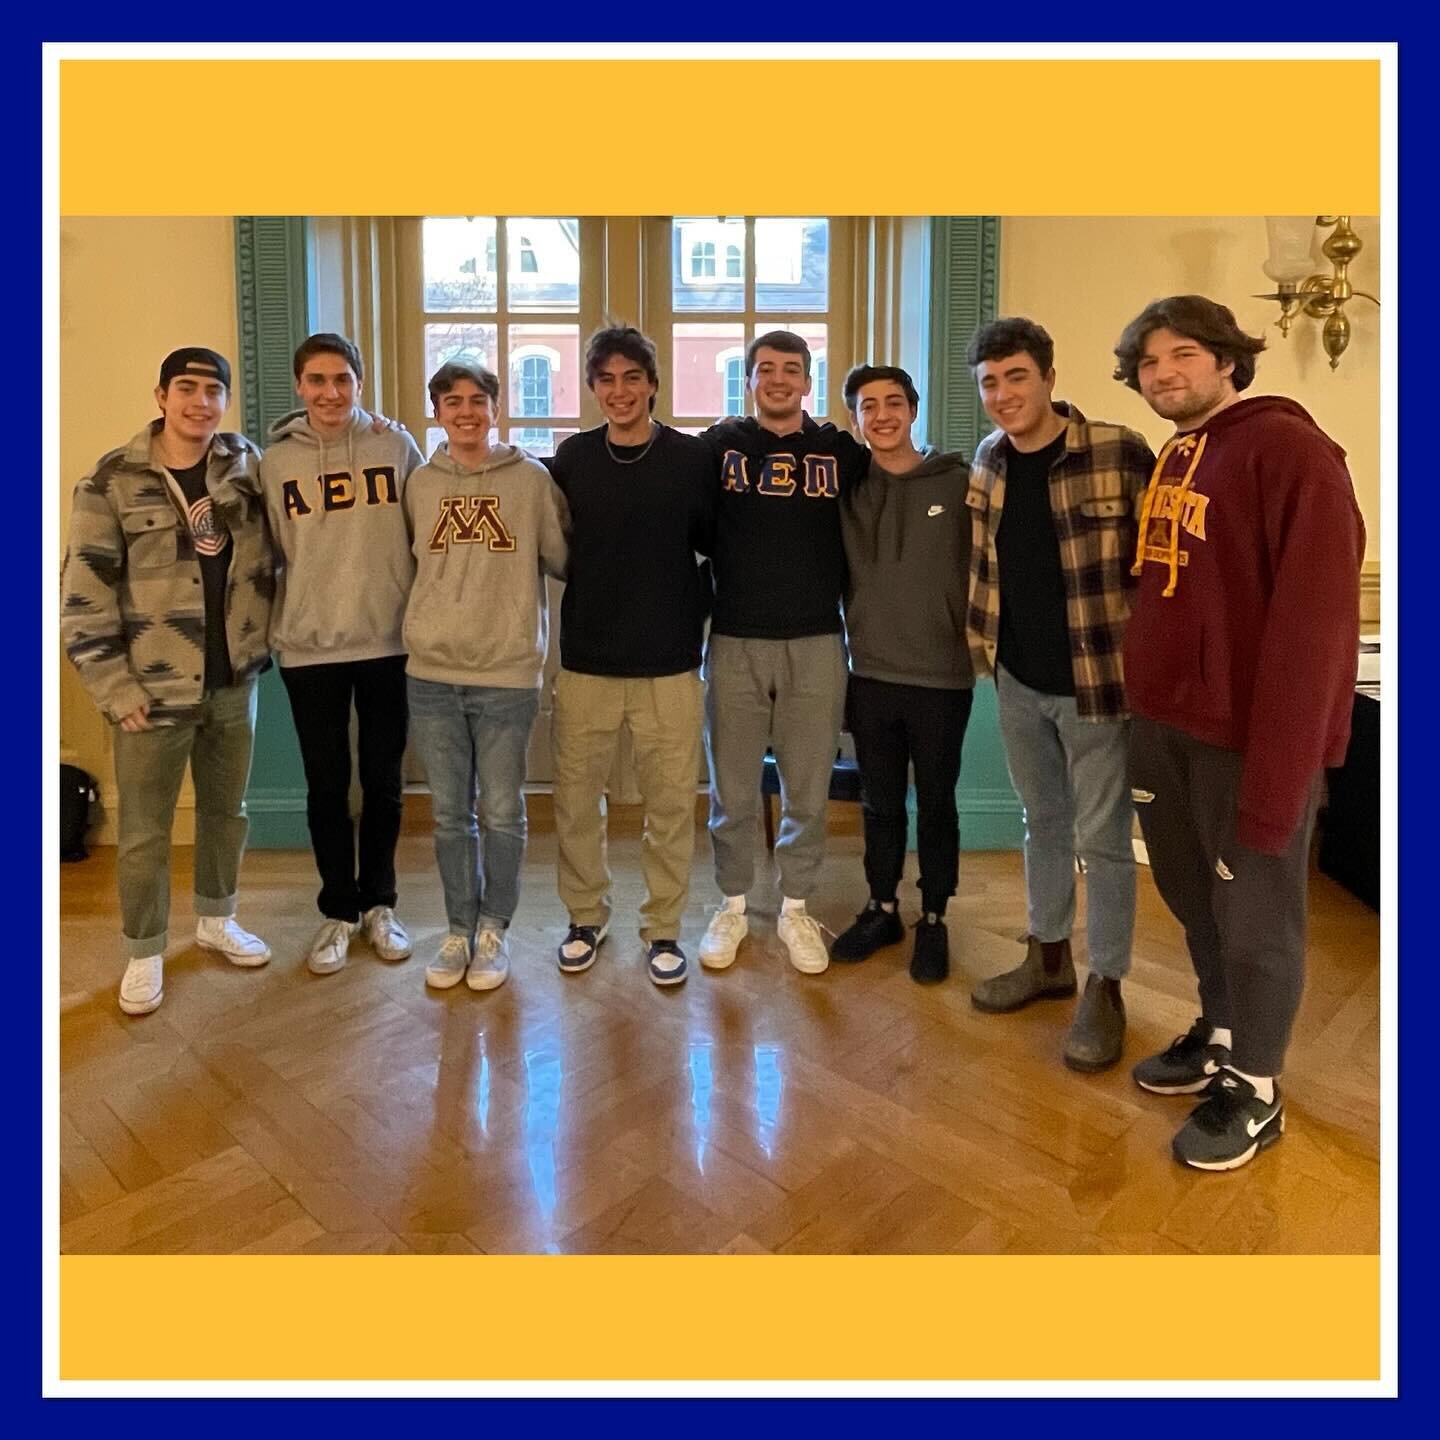 Recently, our brothers made the trek to AEPi&rsquo;s annual Regional Retreat, and they were very happy to connect with other AEPi chapters from nearby universities. We look forward to continuing to this collaboration, and we are excited to share more